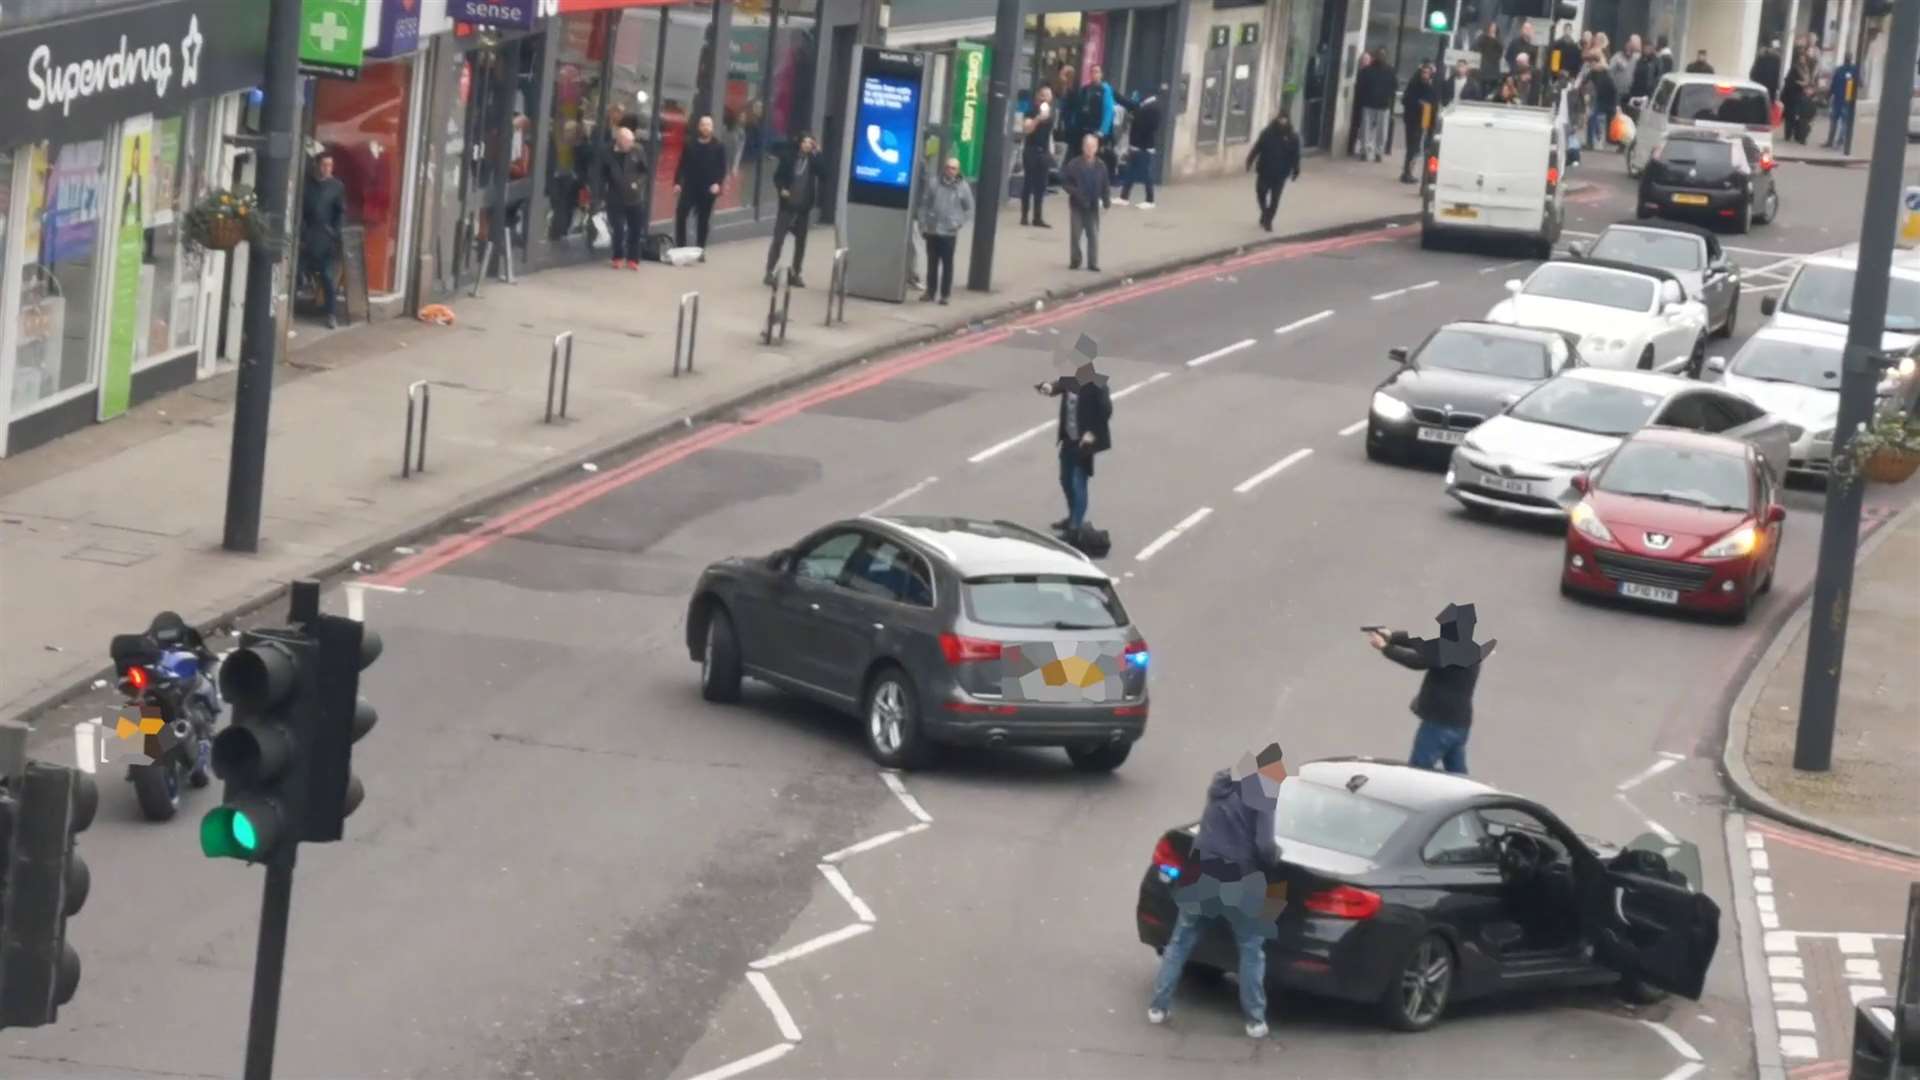 The scene of the incident on Streatham High Road (Metropolitan Police/PA)